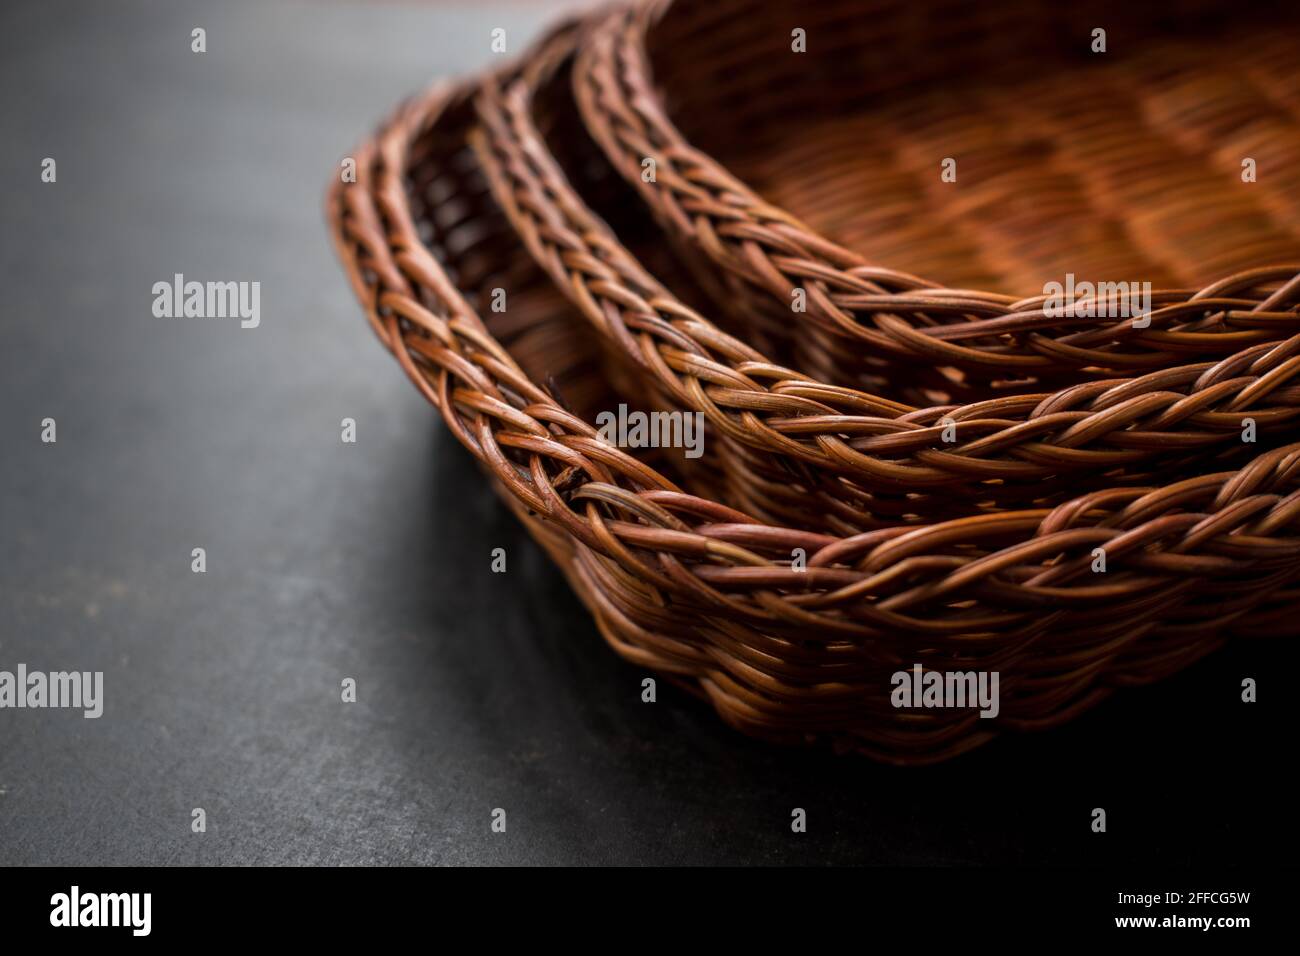 Some brown handmade baskets on a black wooden table Stock Photo